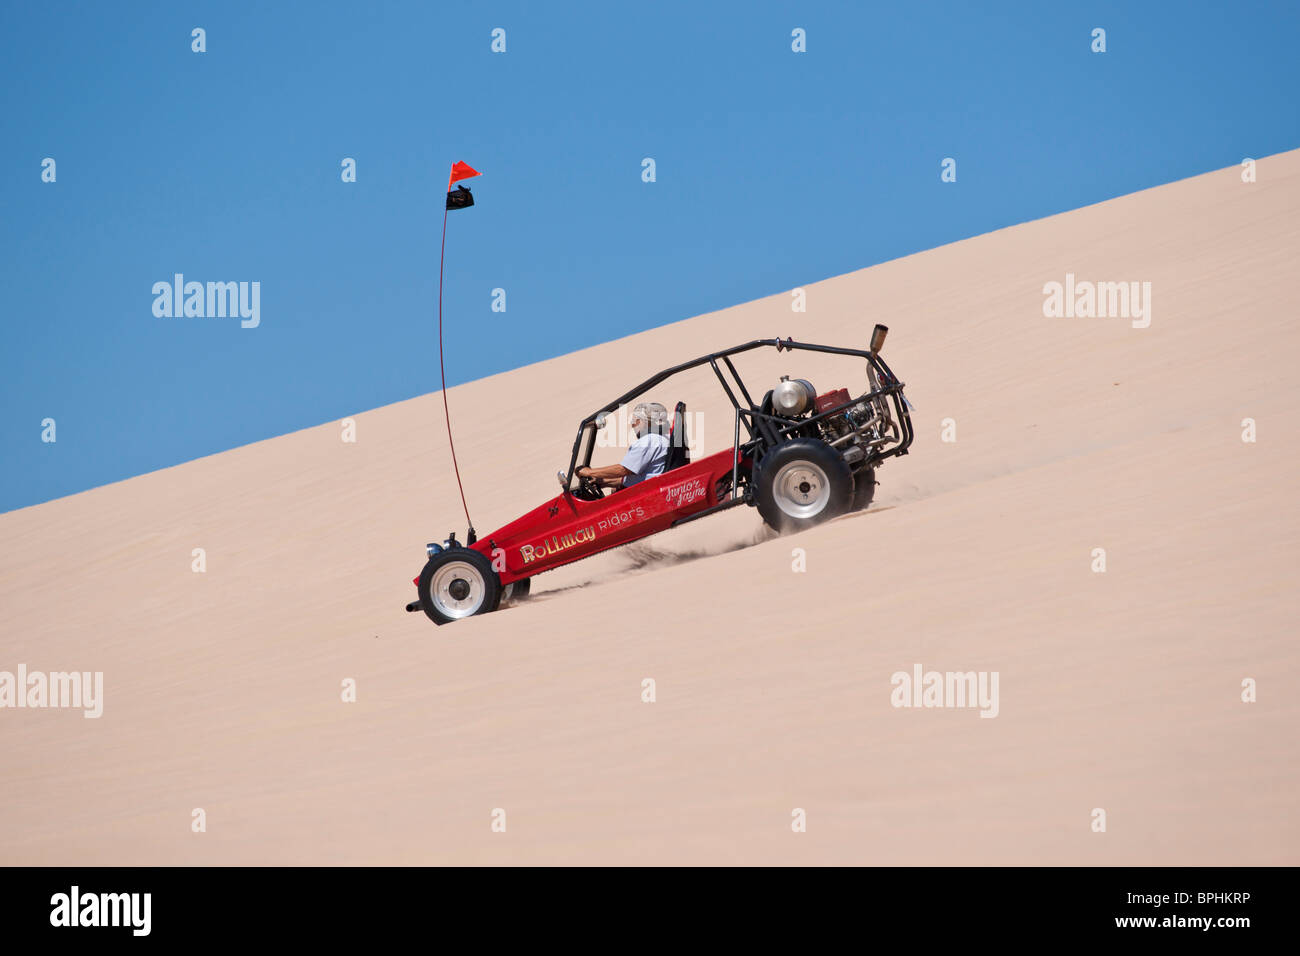 silver lake sand dunes buggy rentals